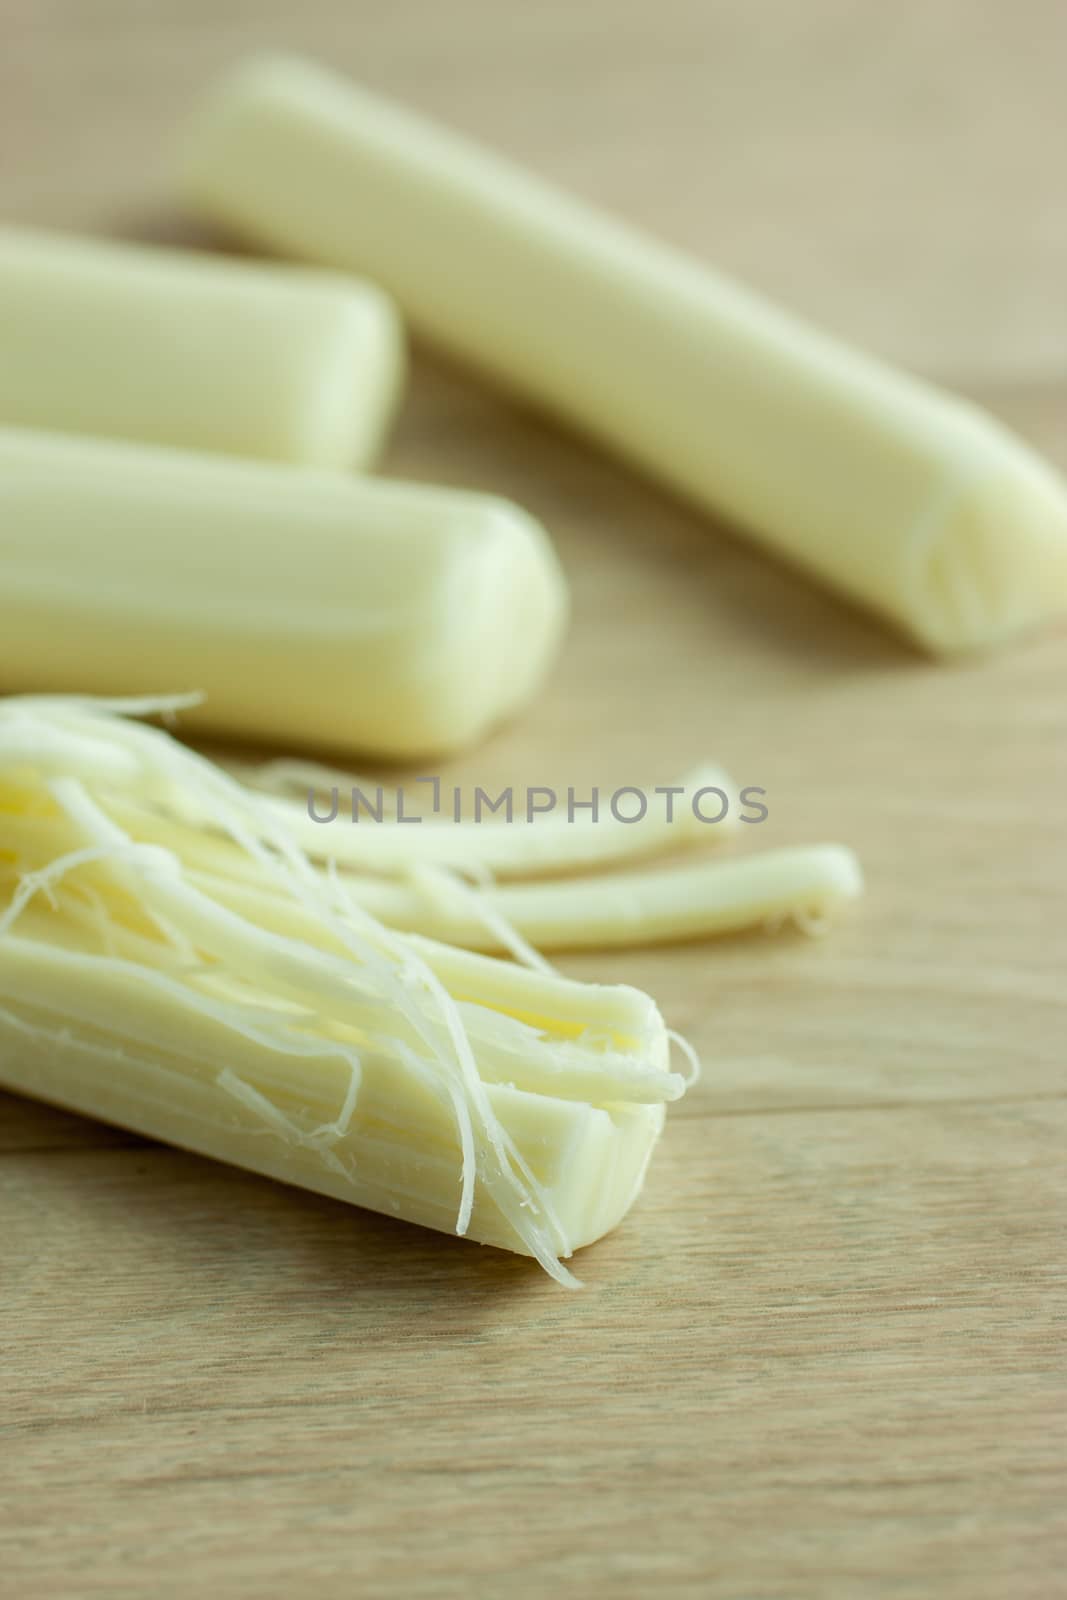 Sticks of mozzerella string cheese on a light colored table top.